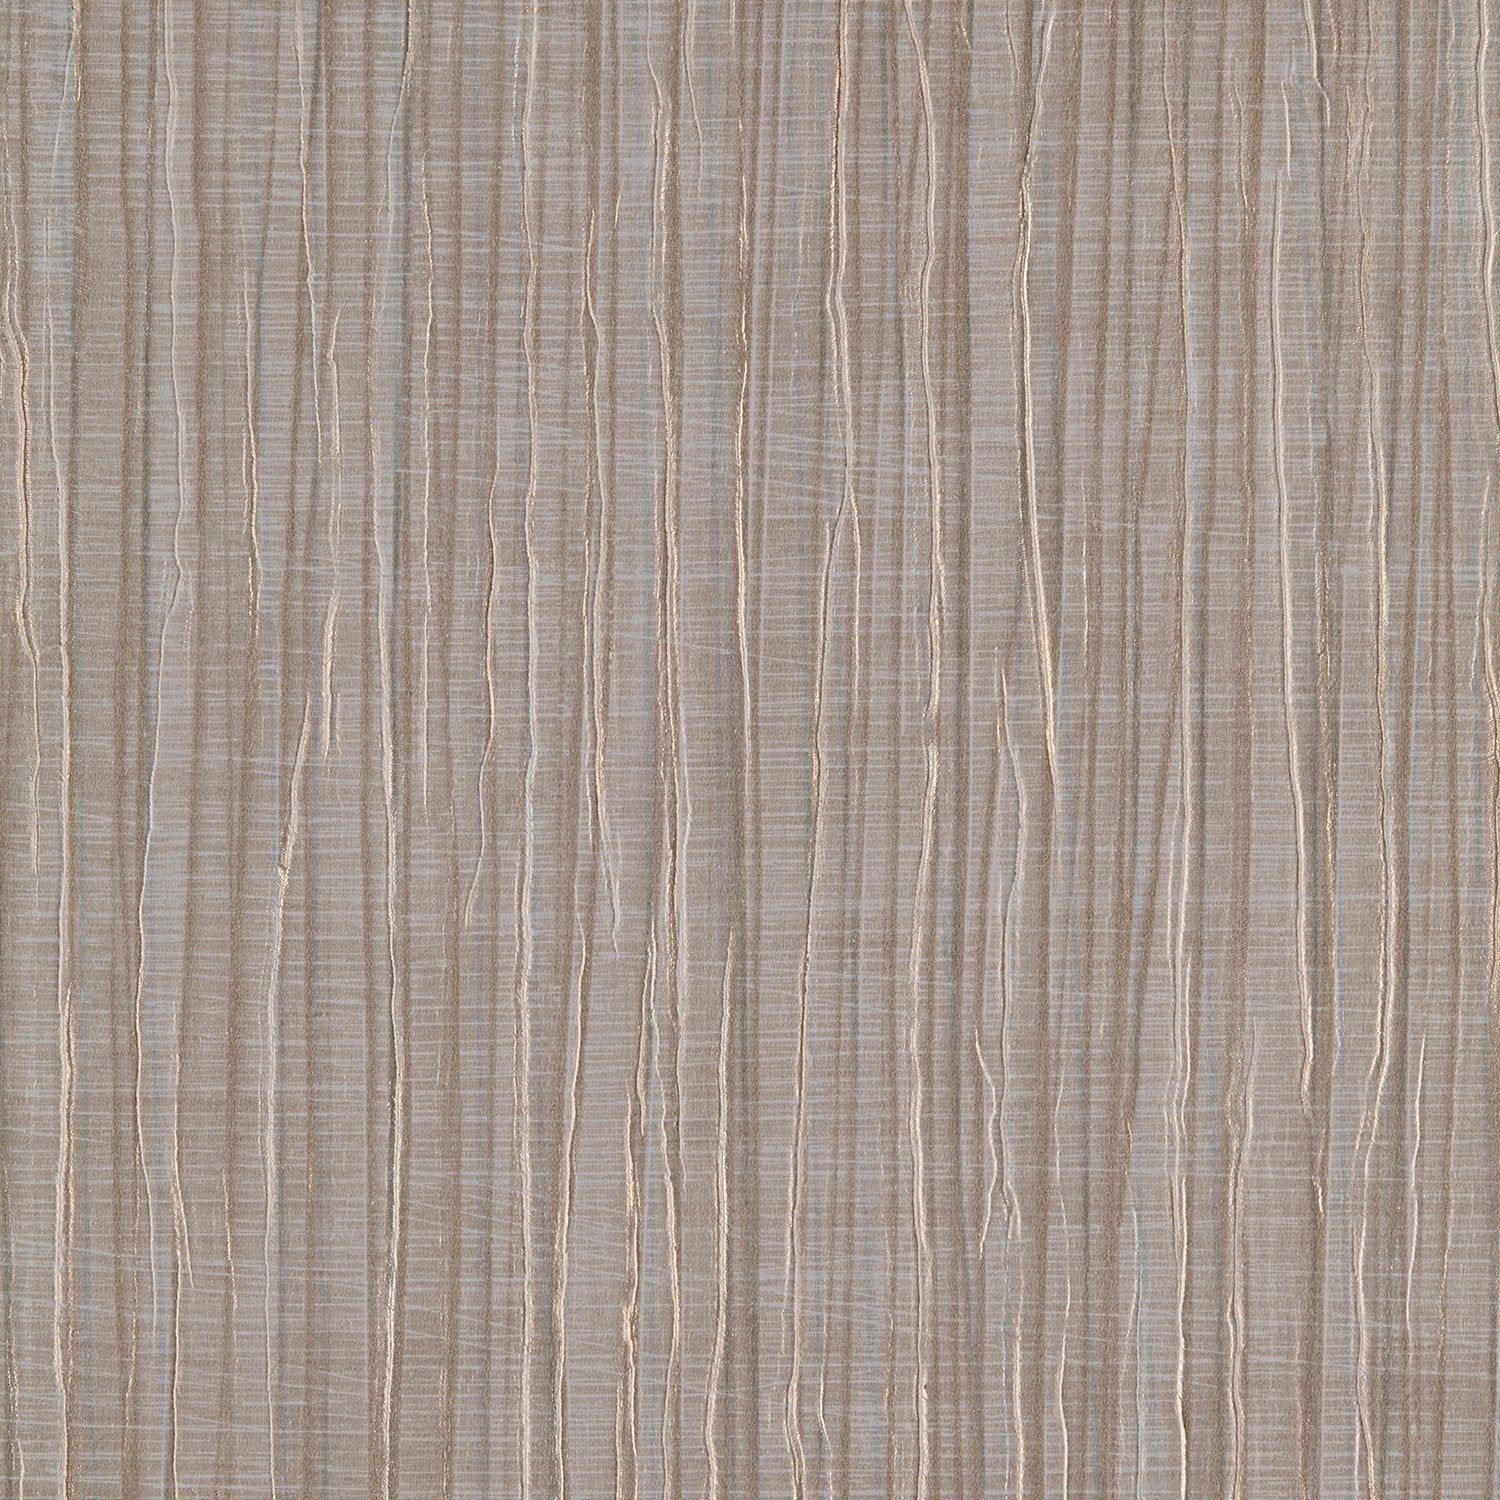 Vogue Pleat - Y47023 - Wallcovering - Vycon - Kube Contract